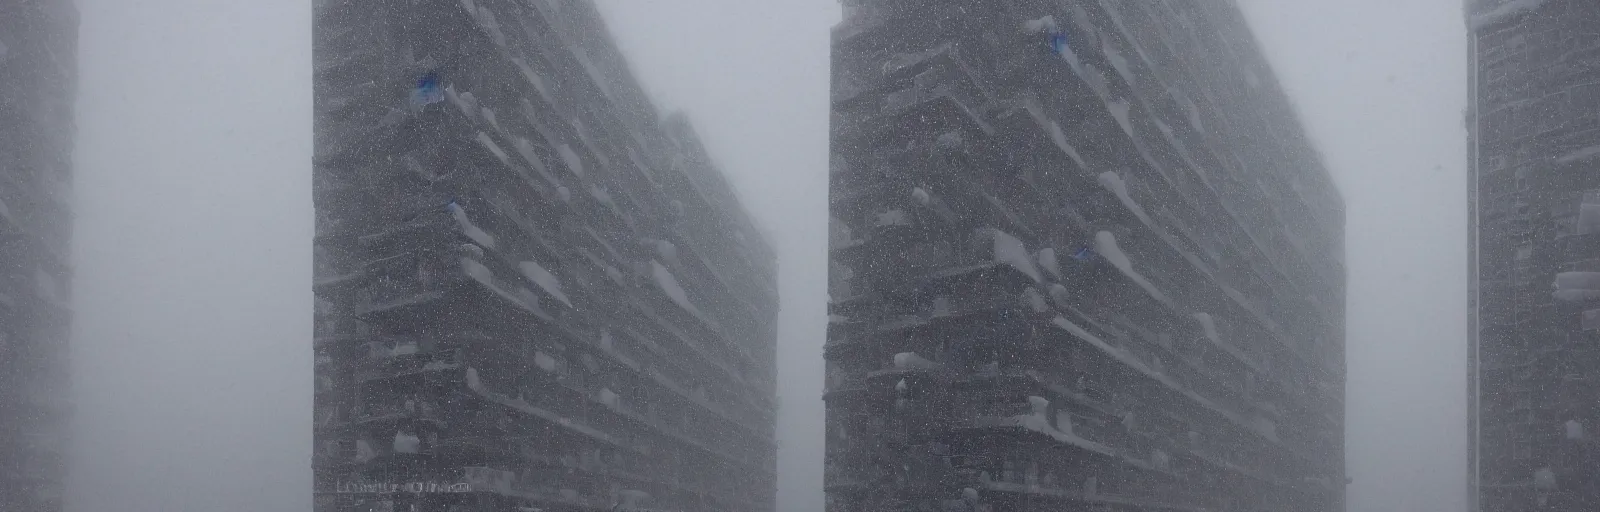 Prompt: snow falling on complex, geometric brutalist high rise buildings designed by lebbeus woods, fragmented architecture, diagonal shapes, complex ramps, balconies, stairways, sharp focus, clear focus, beautiful, award winning architecture, le corbusier, frank lloyd wright, snow, fog, mist, hopeful, quiet, calm, serene